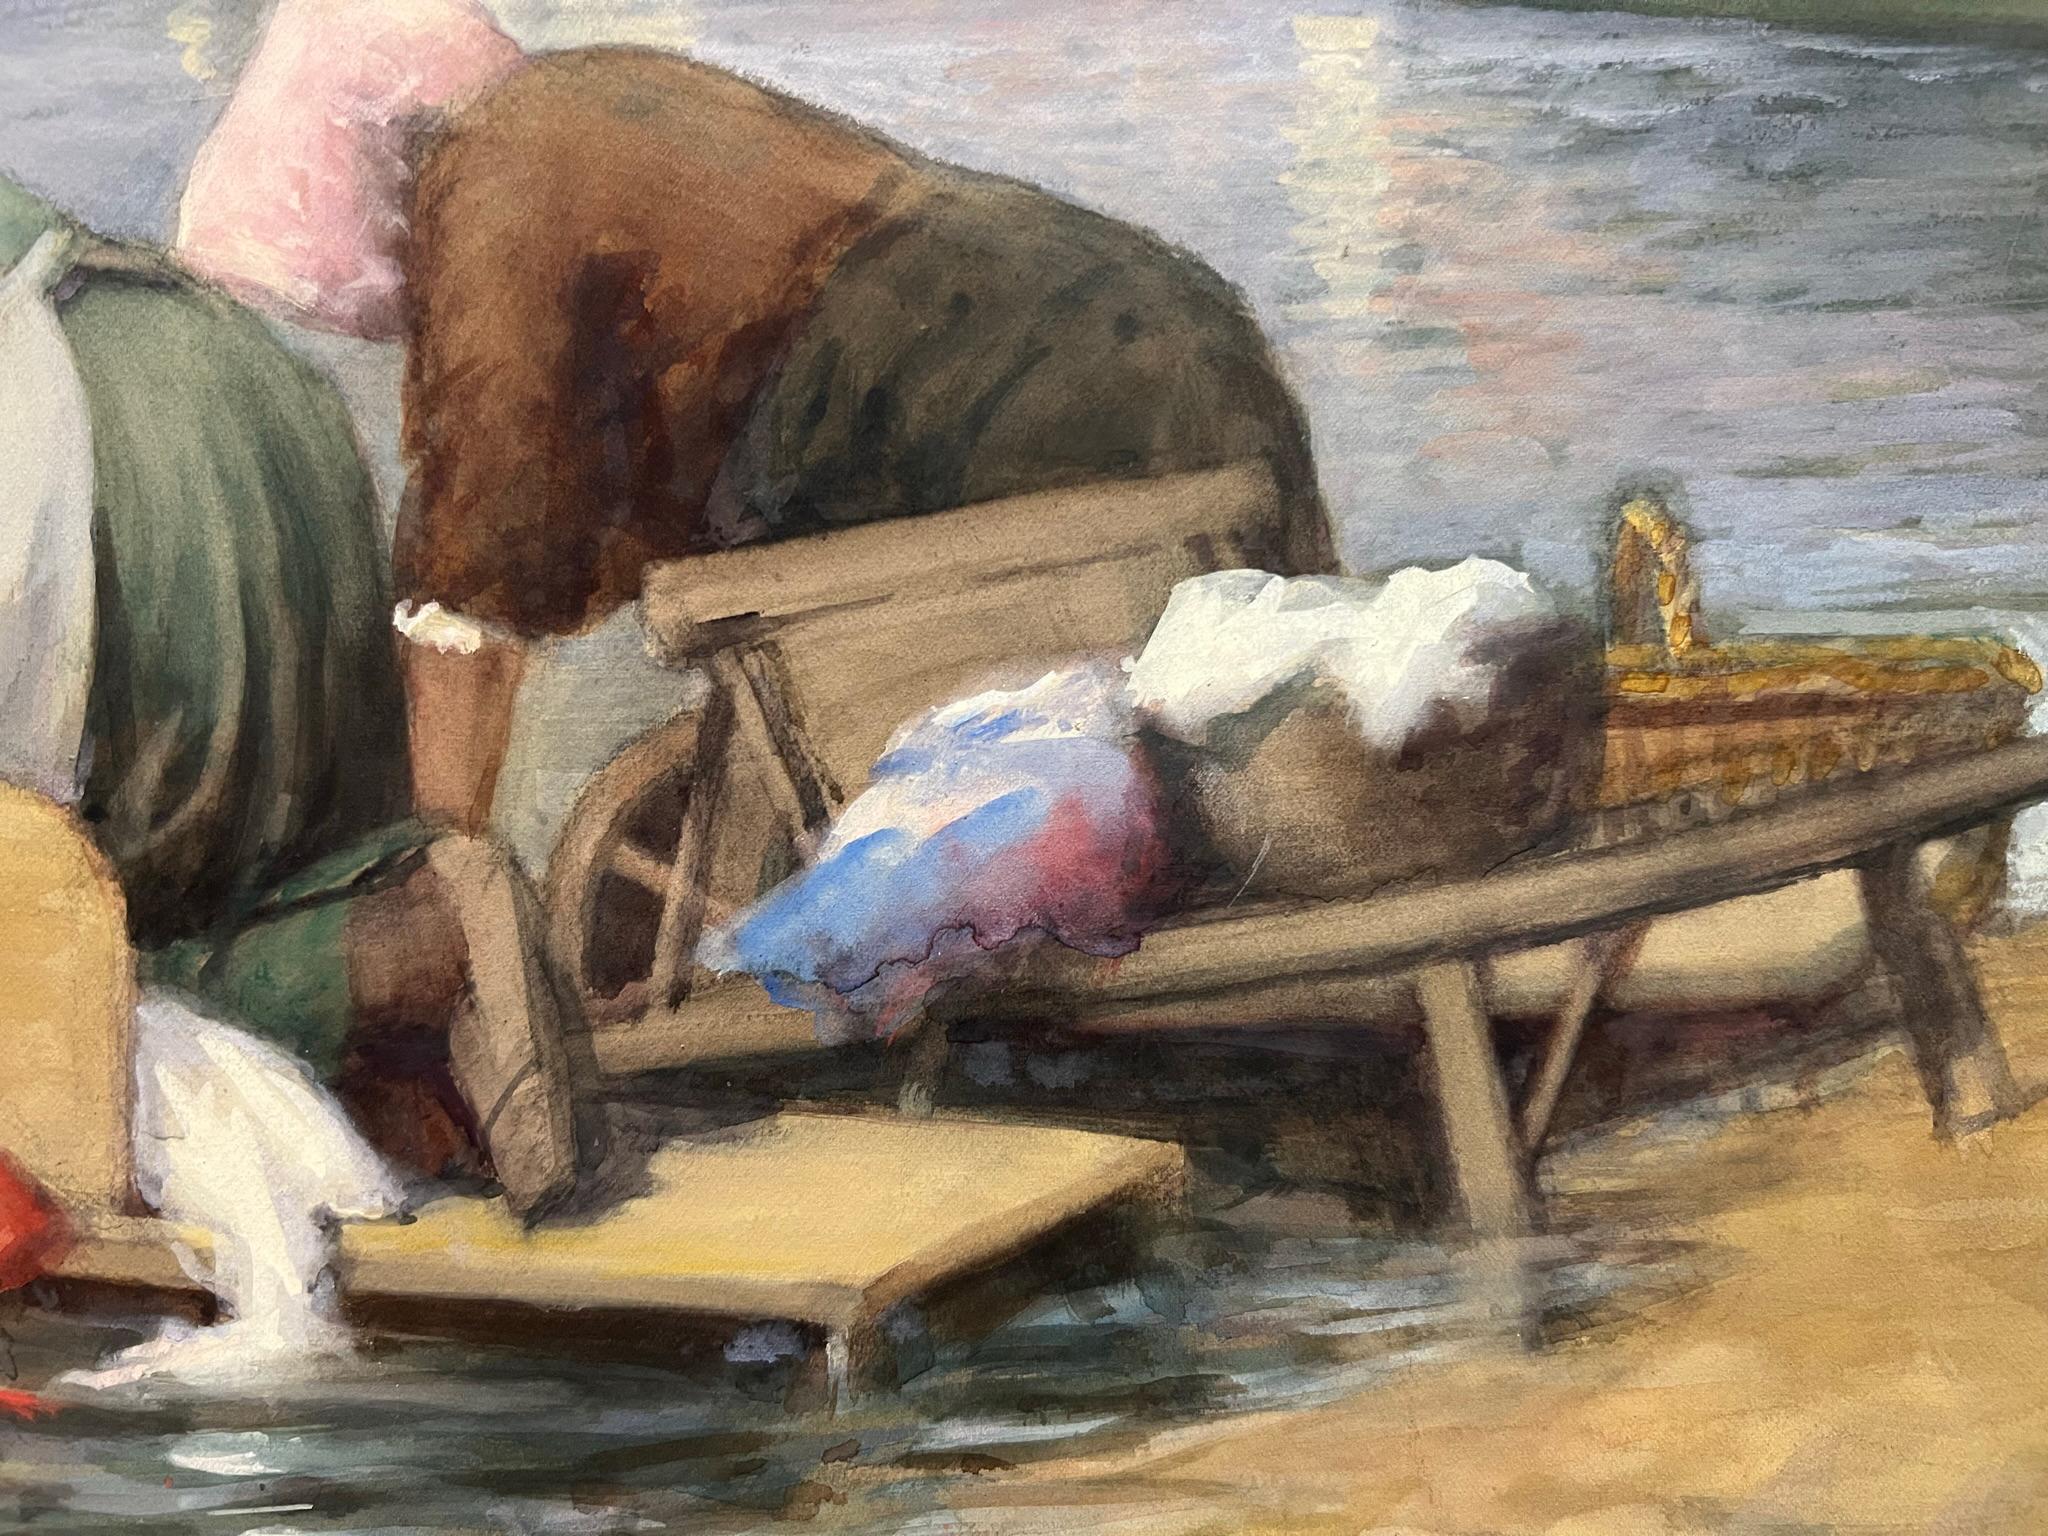 Multi-Exhibition Labels FRENCH IMPRESSIONIST Washerwoman Banks of Loing River - American Impressionist Mixed Media Art by Lee Lufkin Kaula